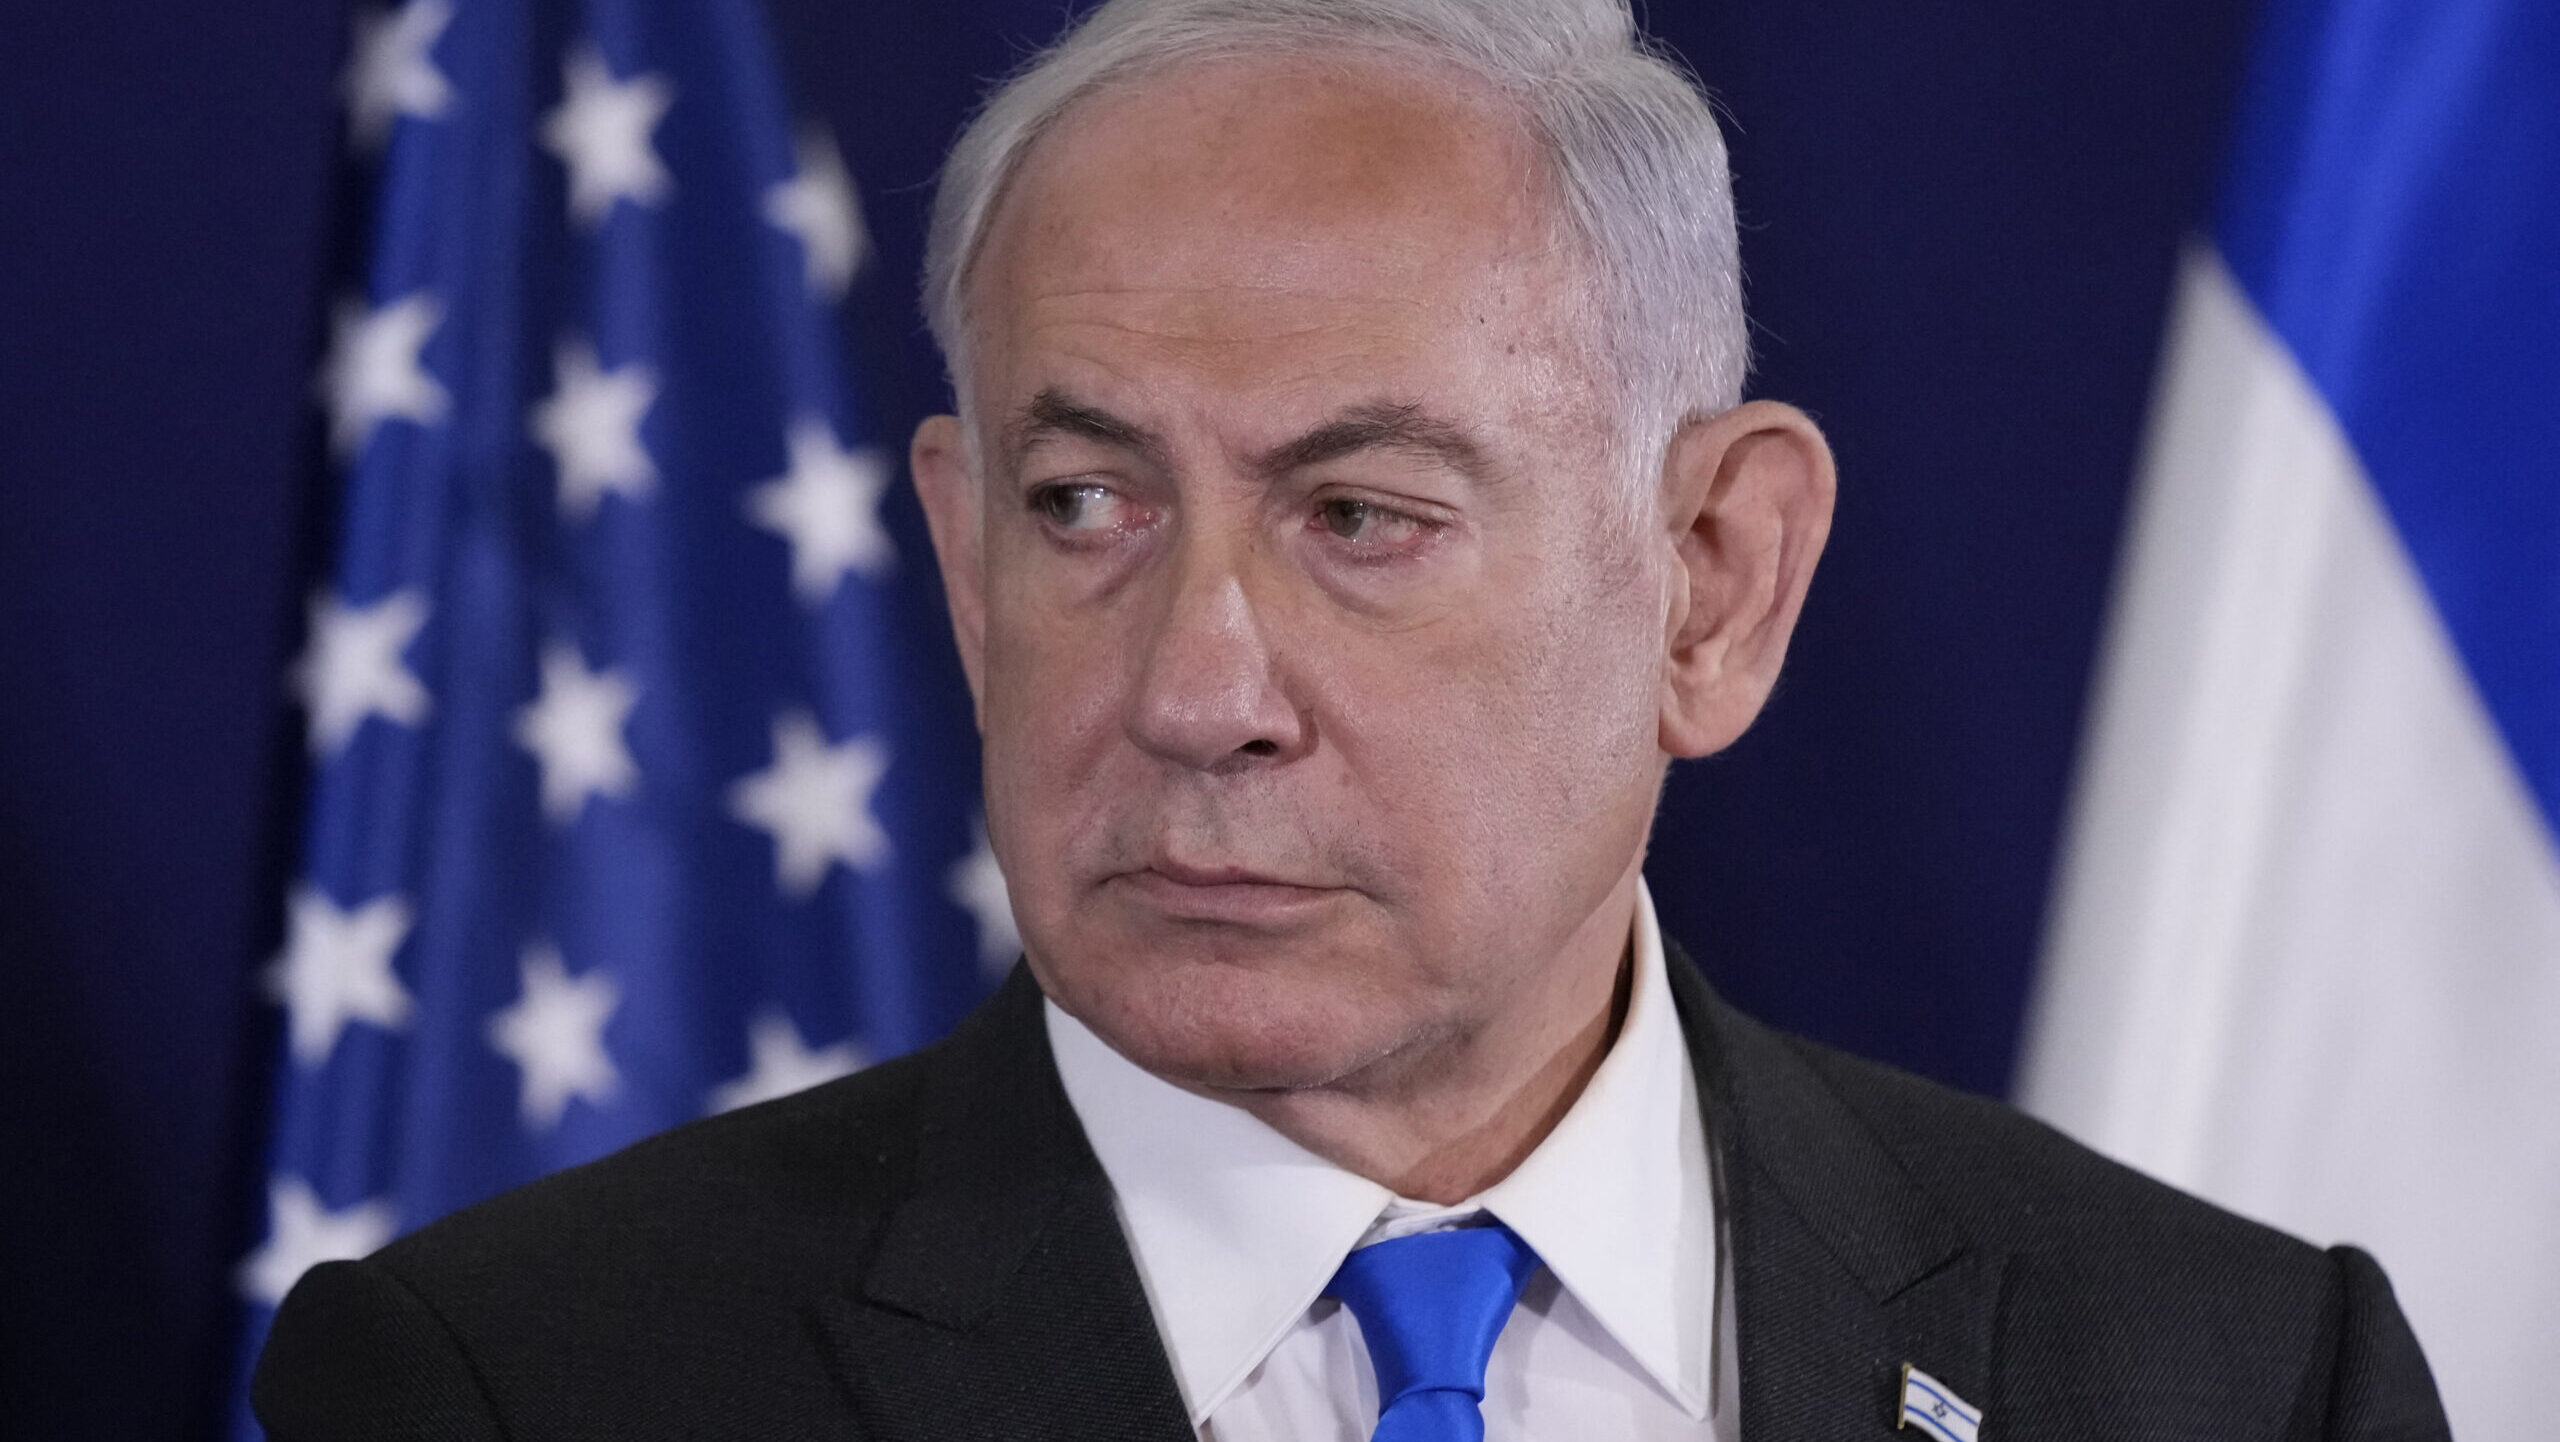 Netanyahu Proposes Post-War Gaza Plan Led by ‘Local Officials’ Unaffiliated With Terrorism